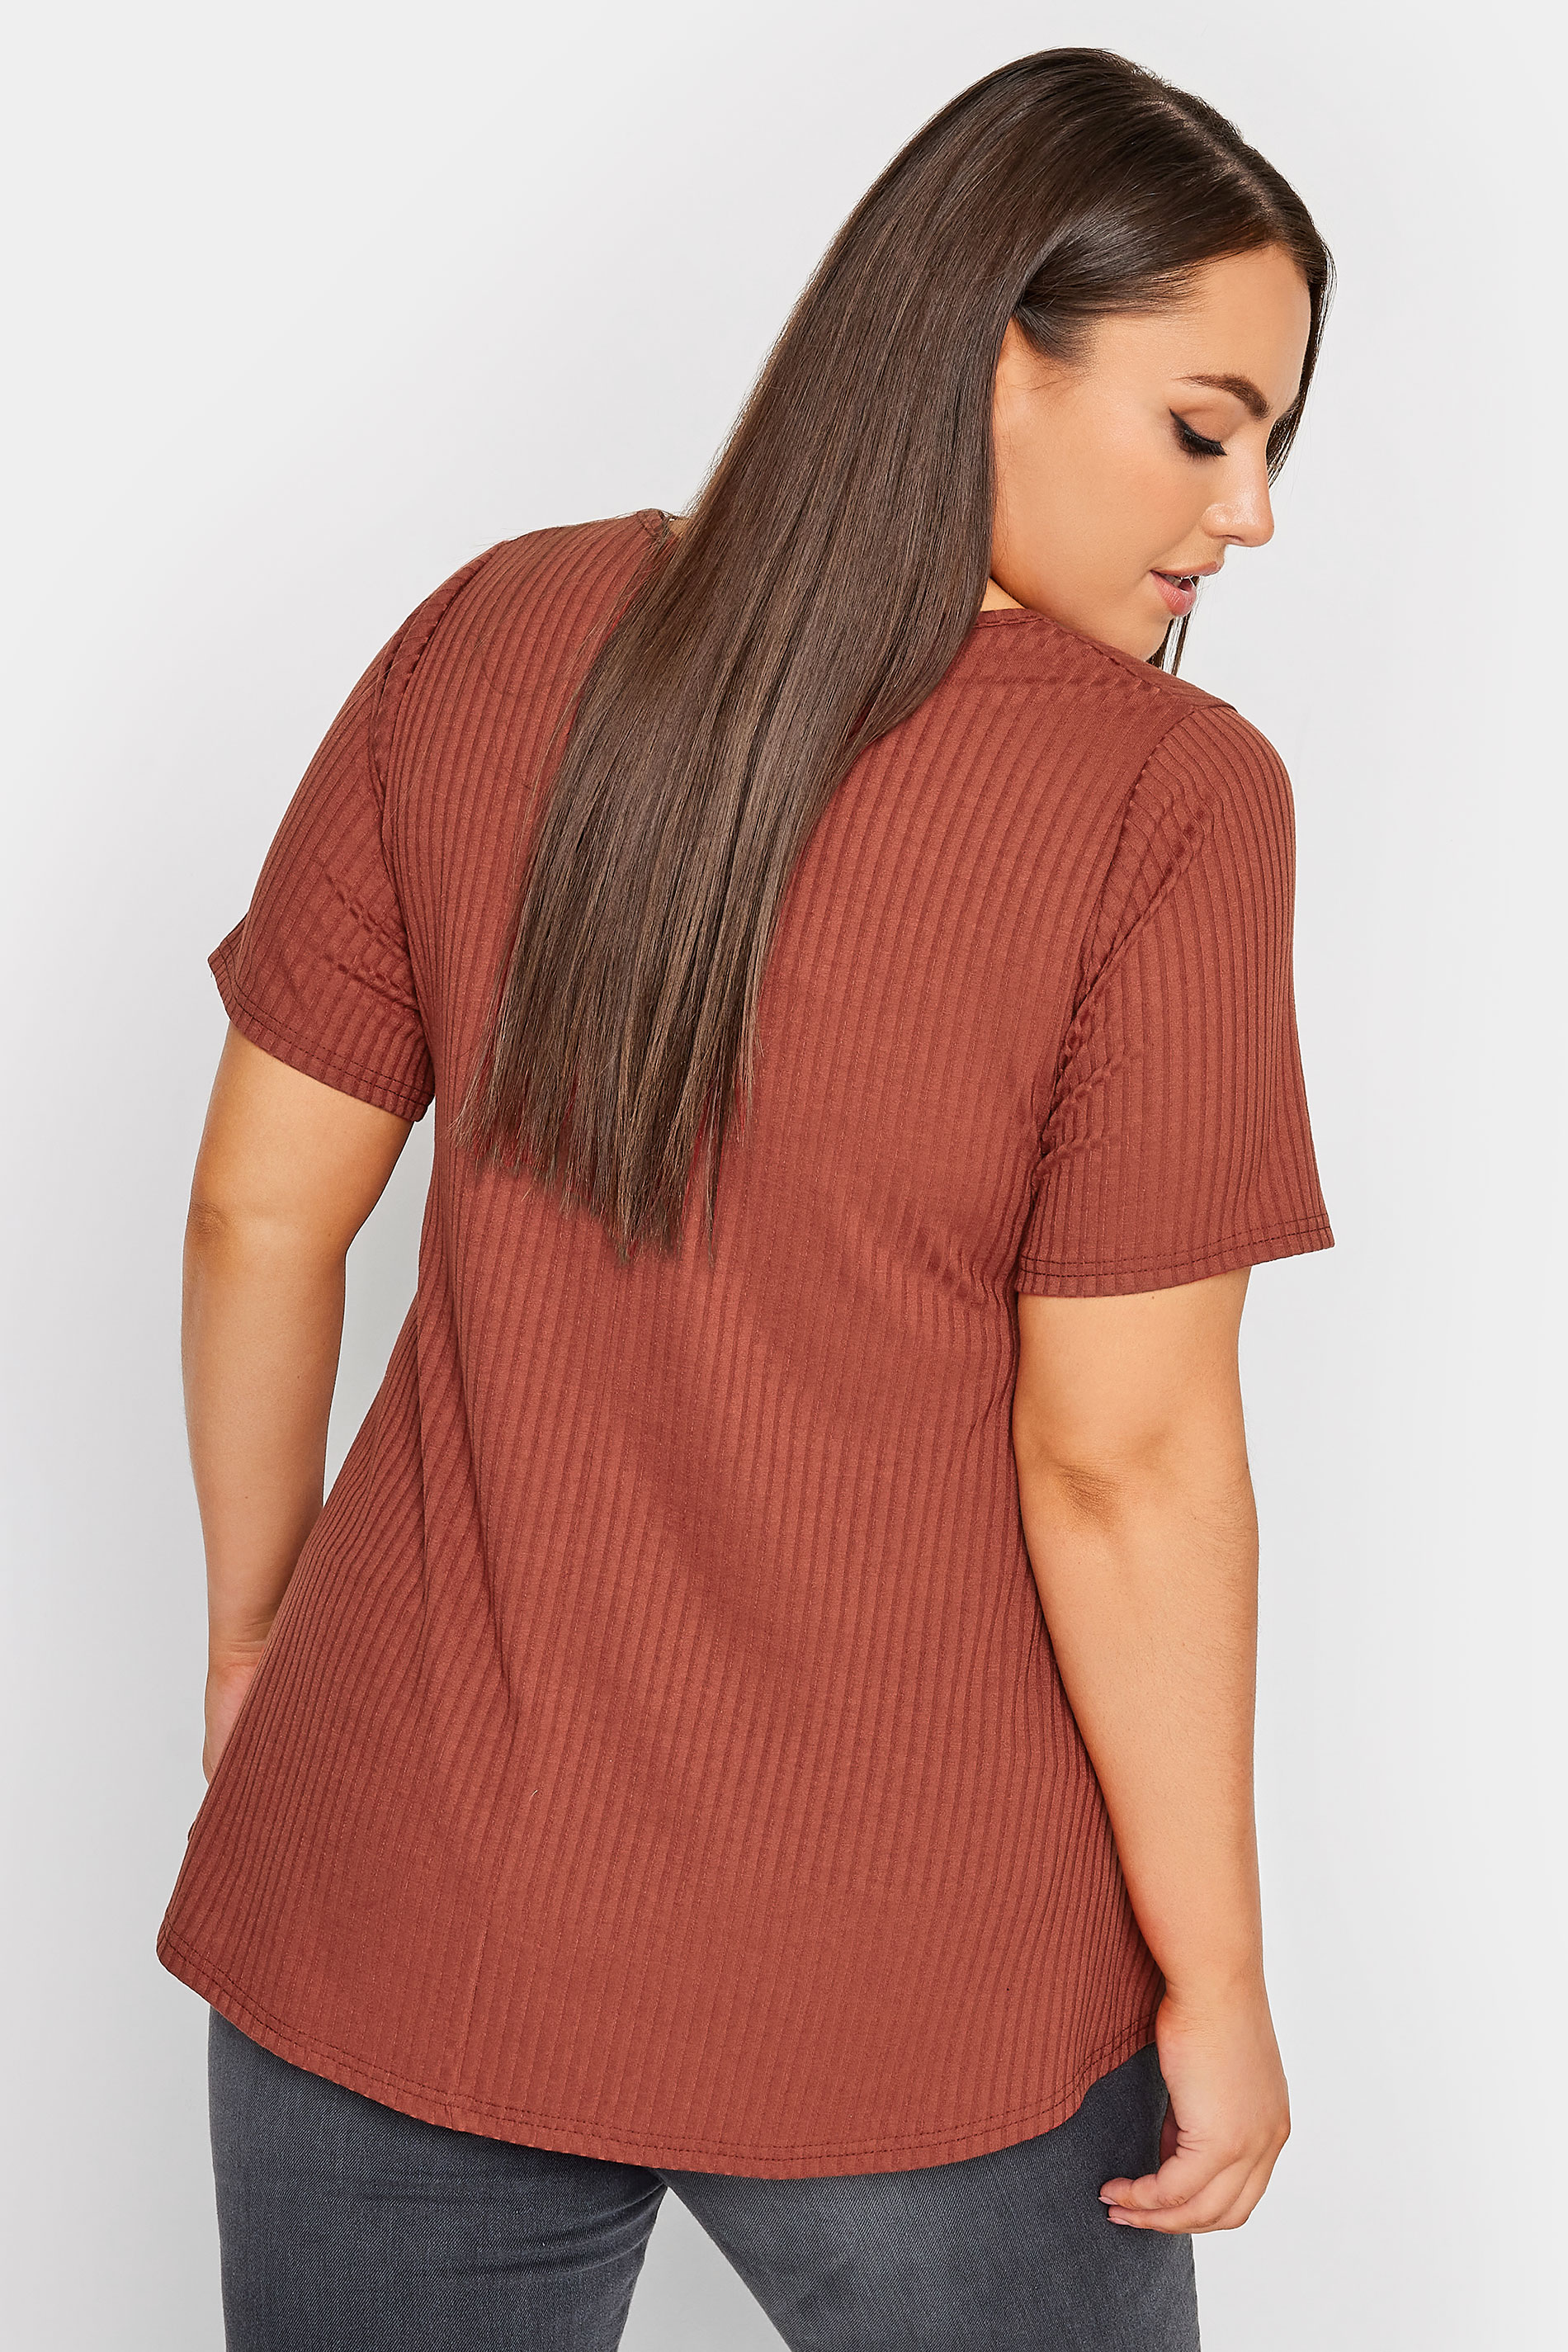 LIMITED COLLECTION Plus Size Curve Rust Brown Ribbed Swing Top | Yours Clothing  3